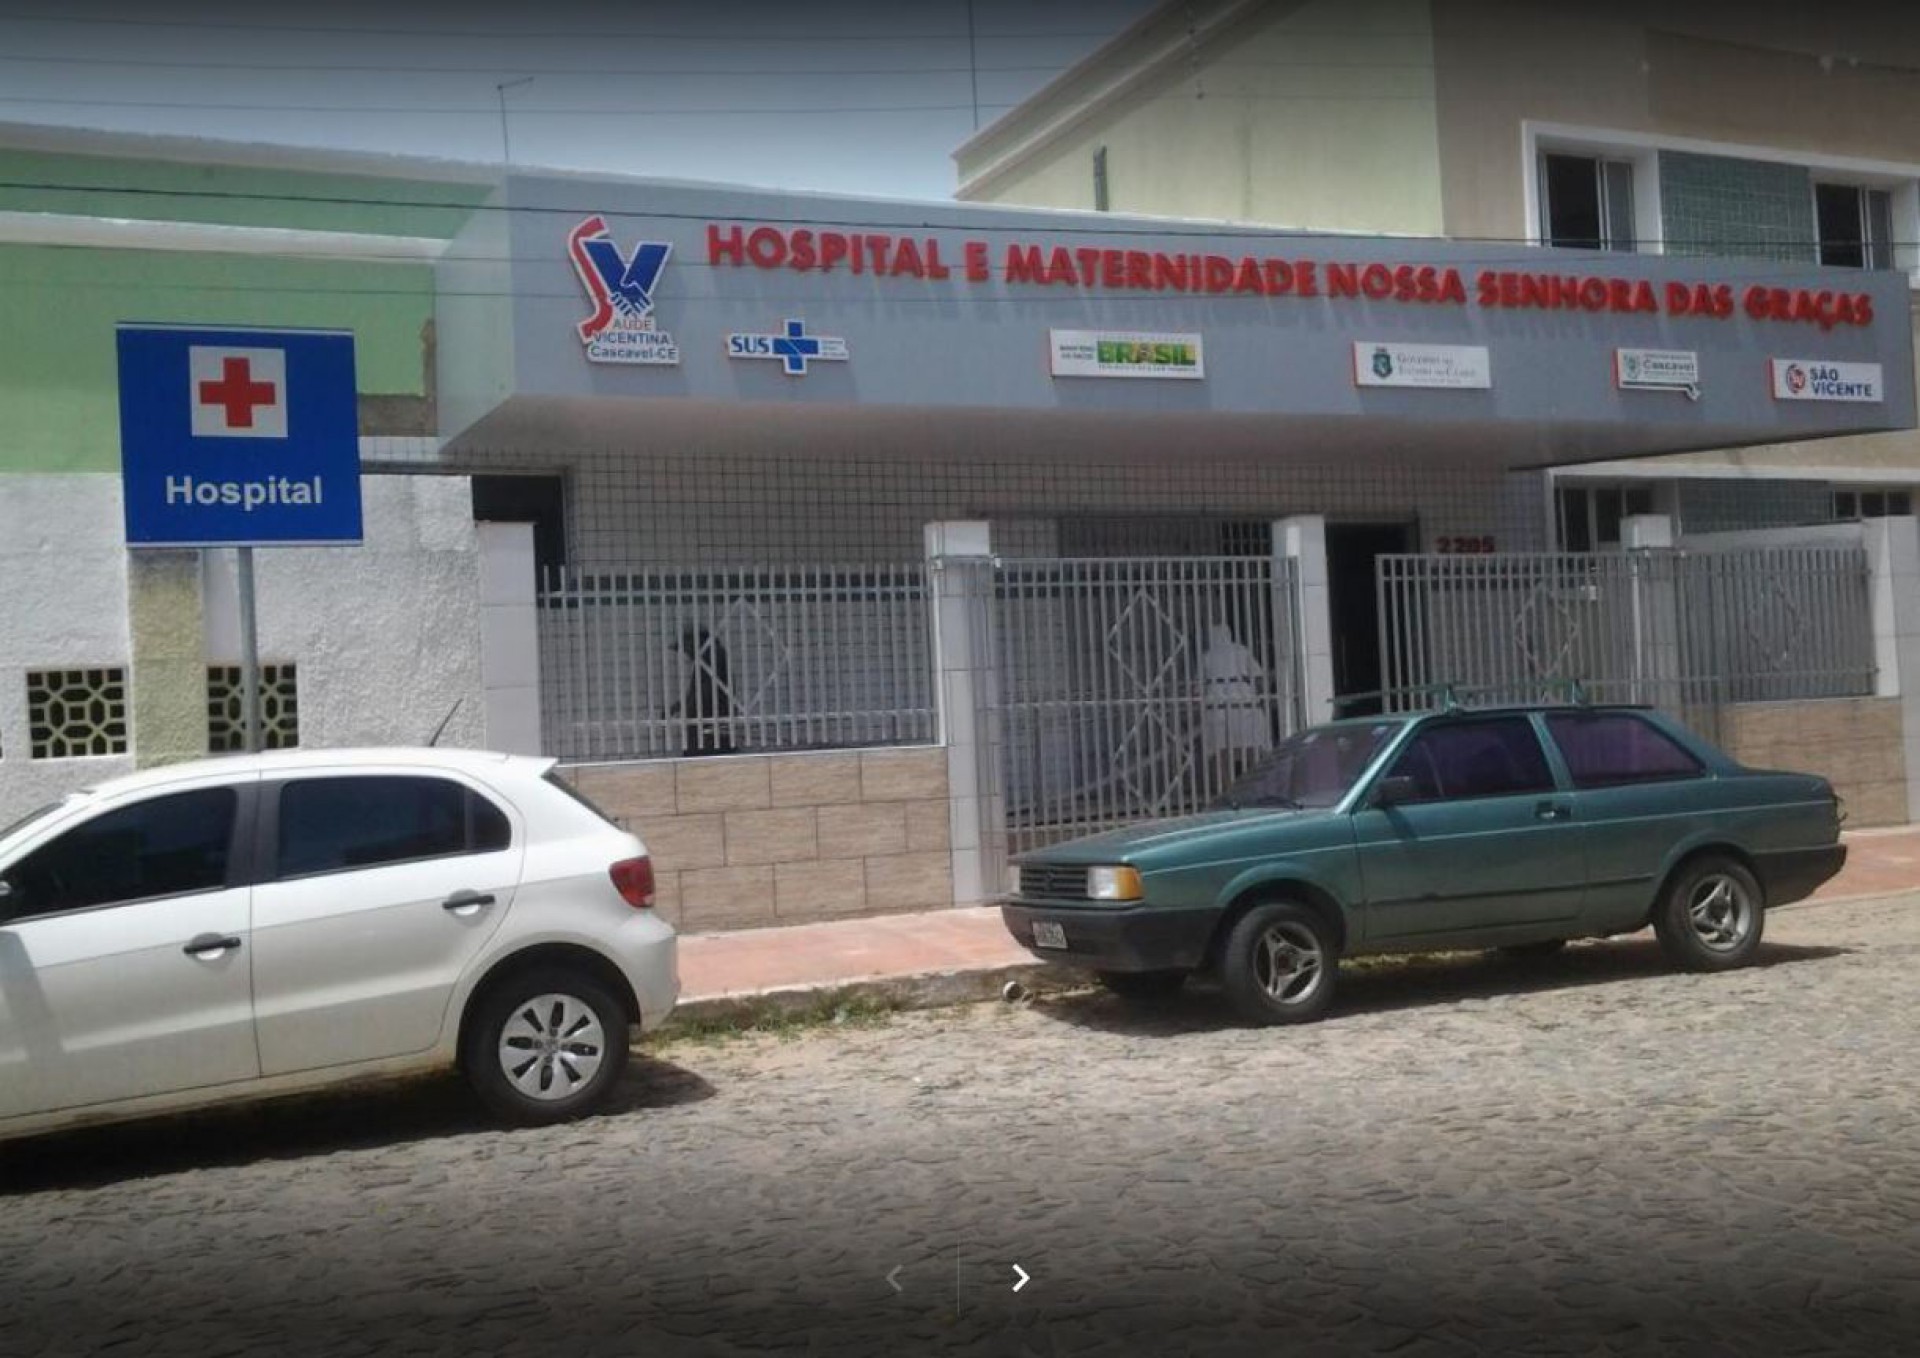 Charity Hospital Claims "Political Bias" and Challenges Expropriation in Cascavel